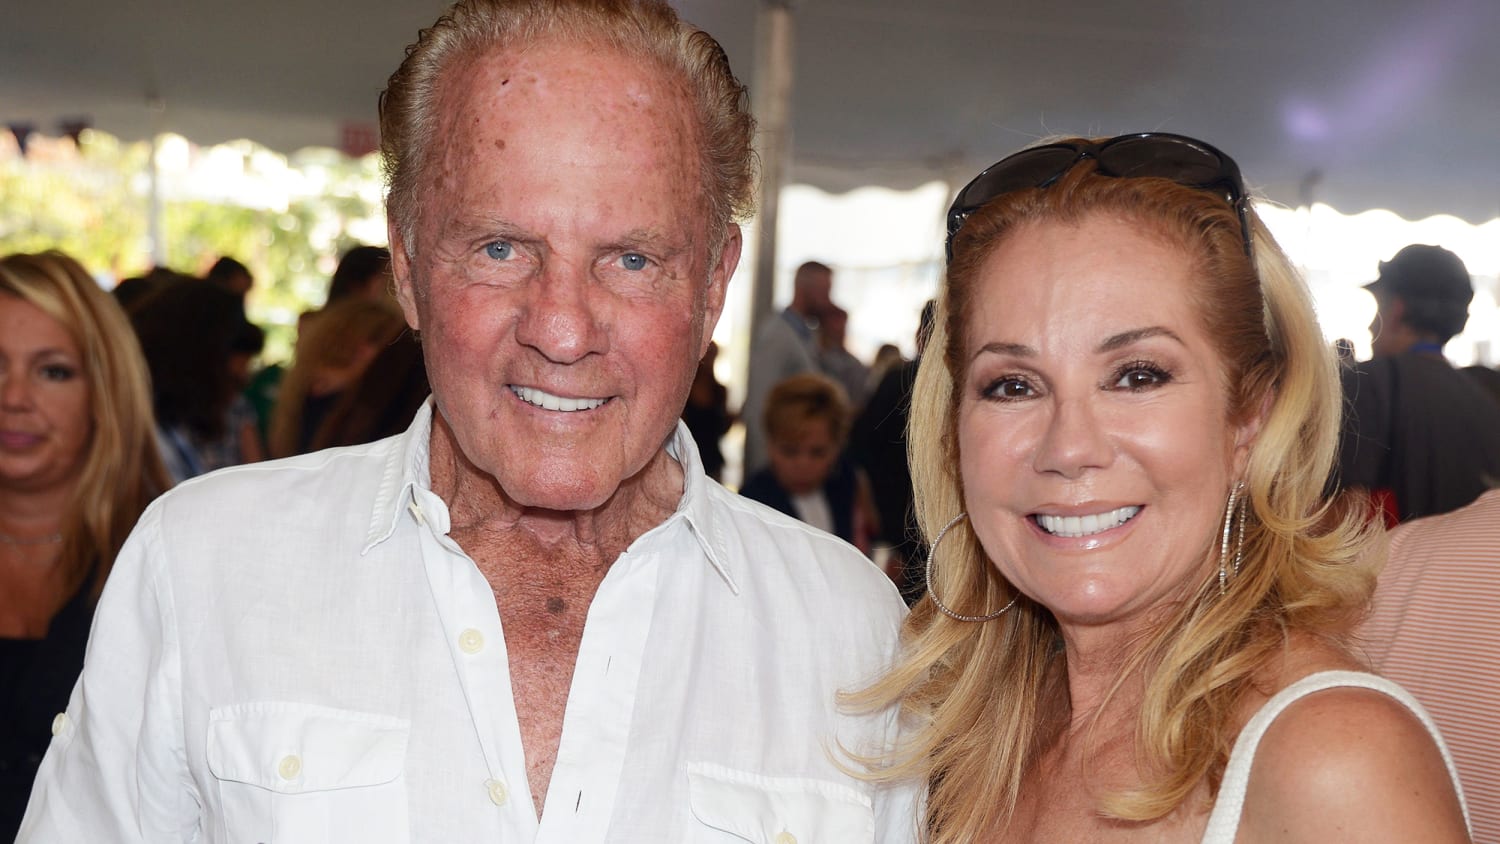 kathie lee gifford opens up about being a widow: 'it's just